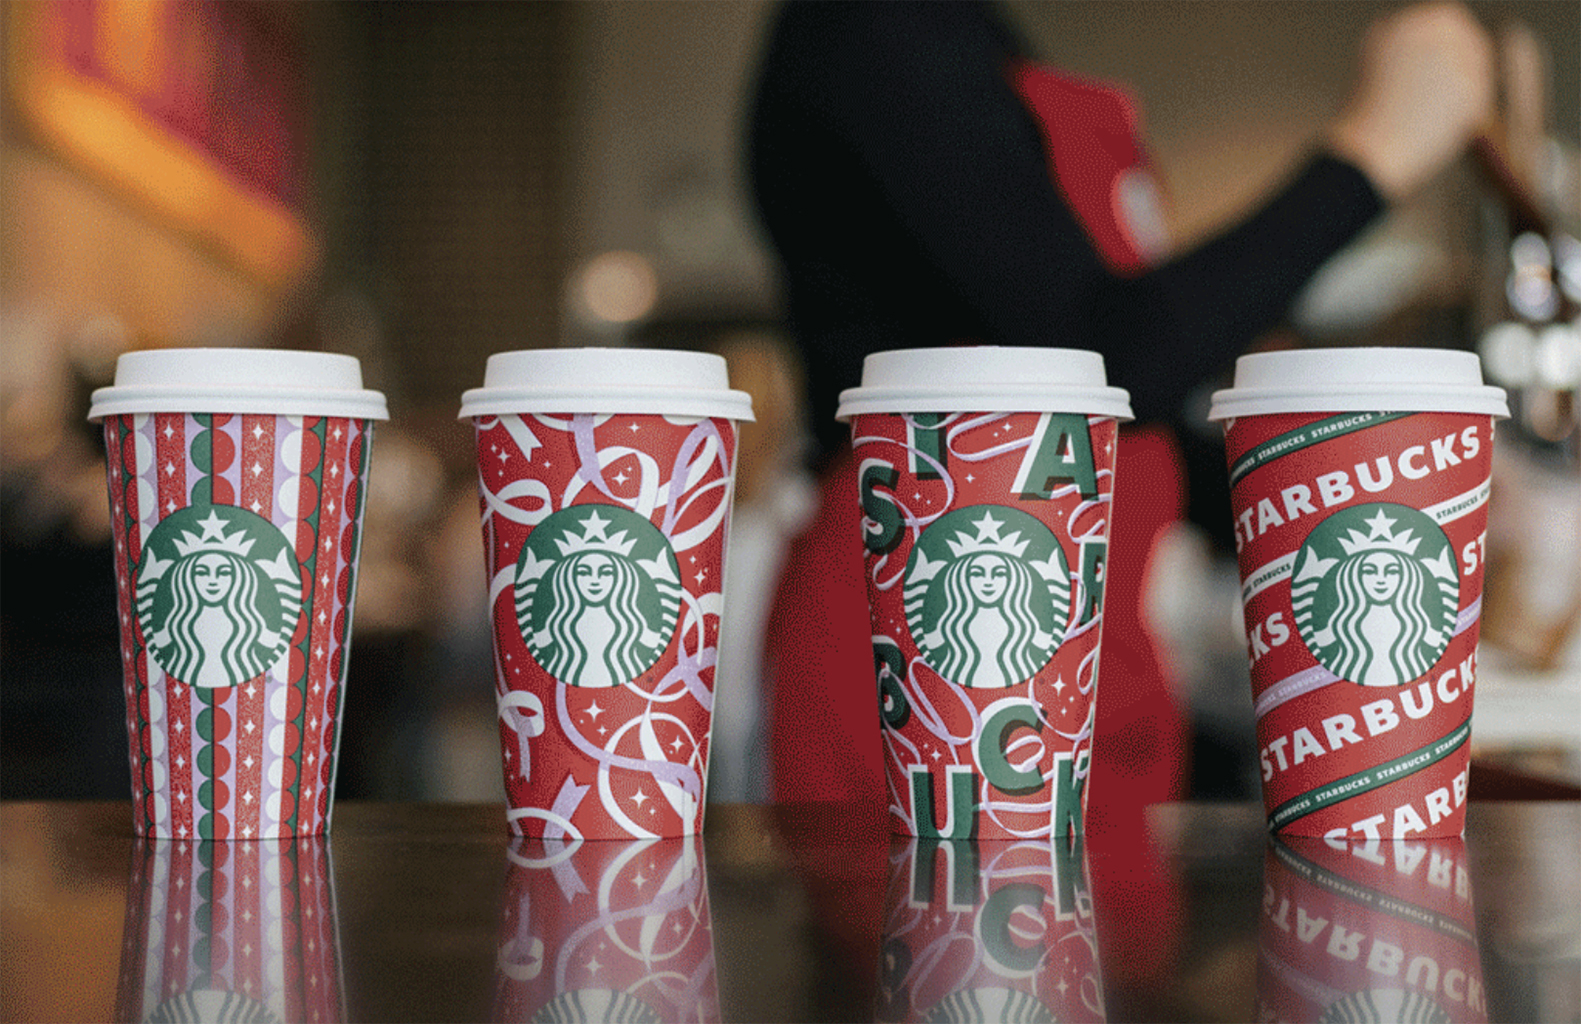 https://akns-images.eonline.com/eol_images/Entire_Site/2021103/rs_1581x1024-211103091444-1024-Starbucks-Holiday-Cups.jpg?fit=around%7C776:503&output-quality=90&crop=776:503;center,top